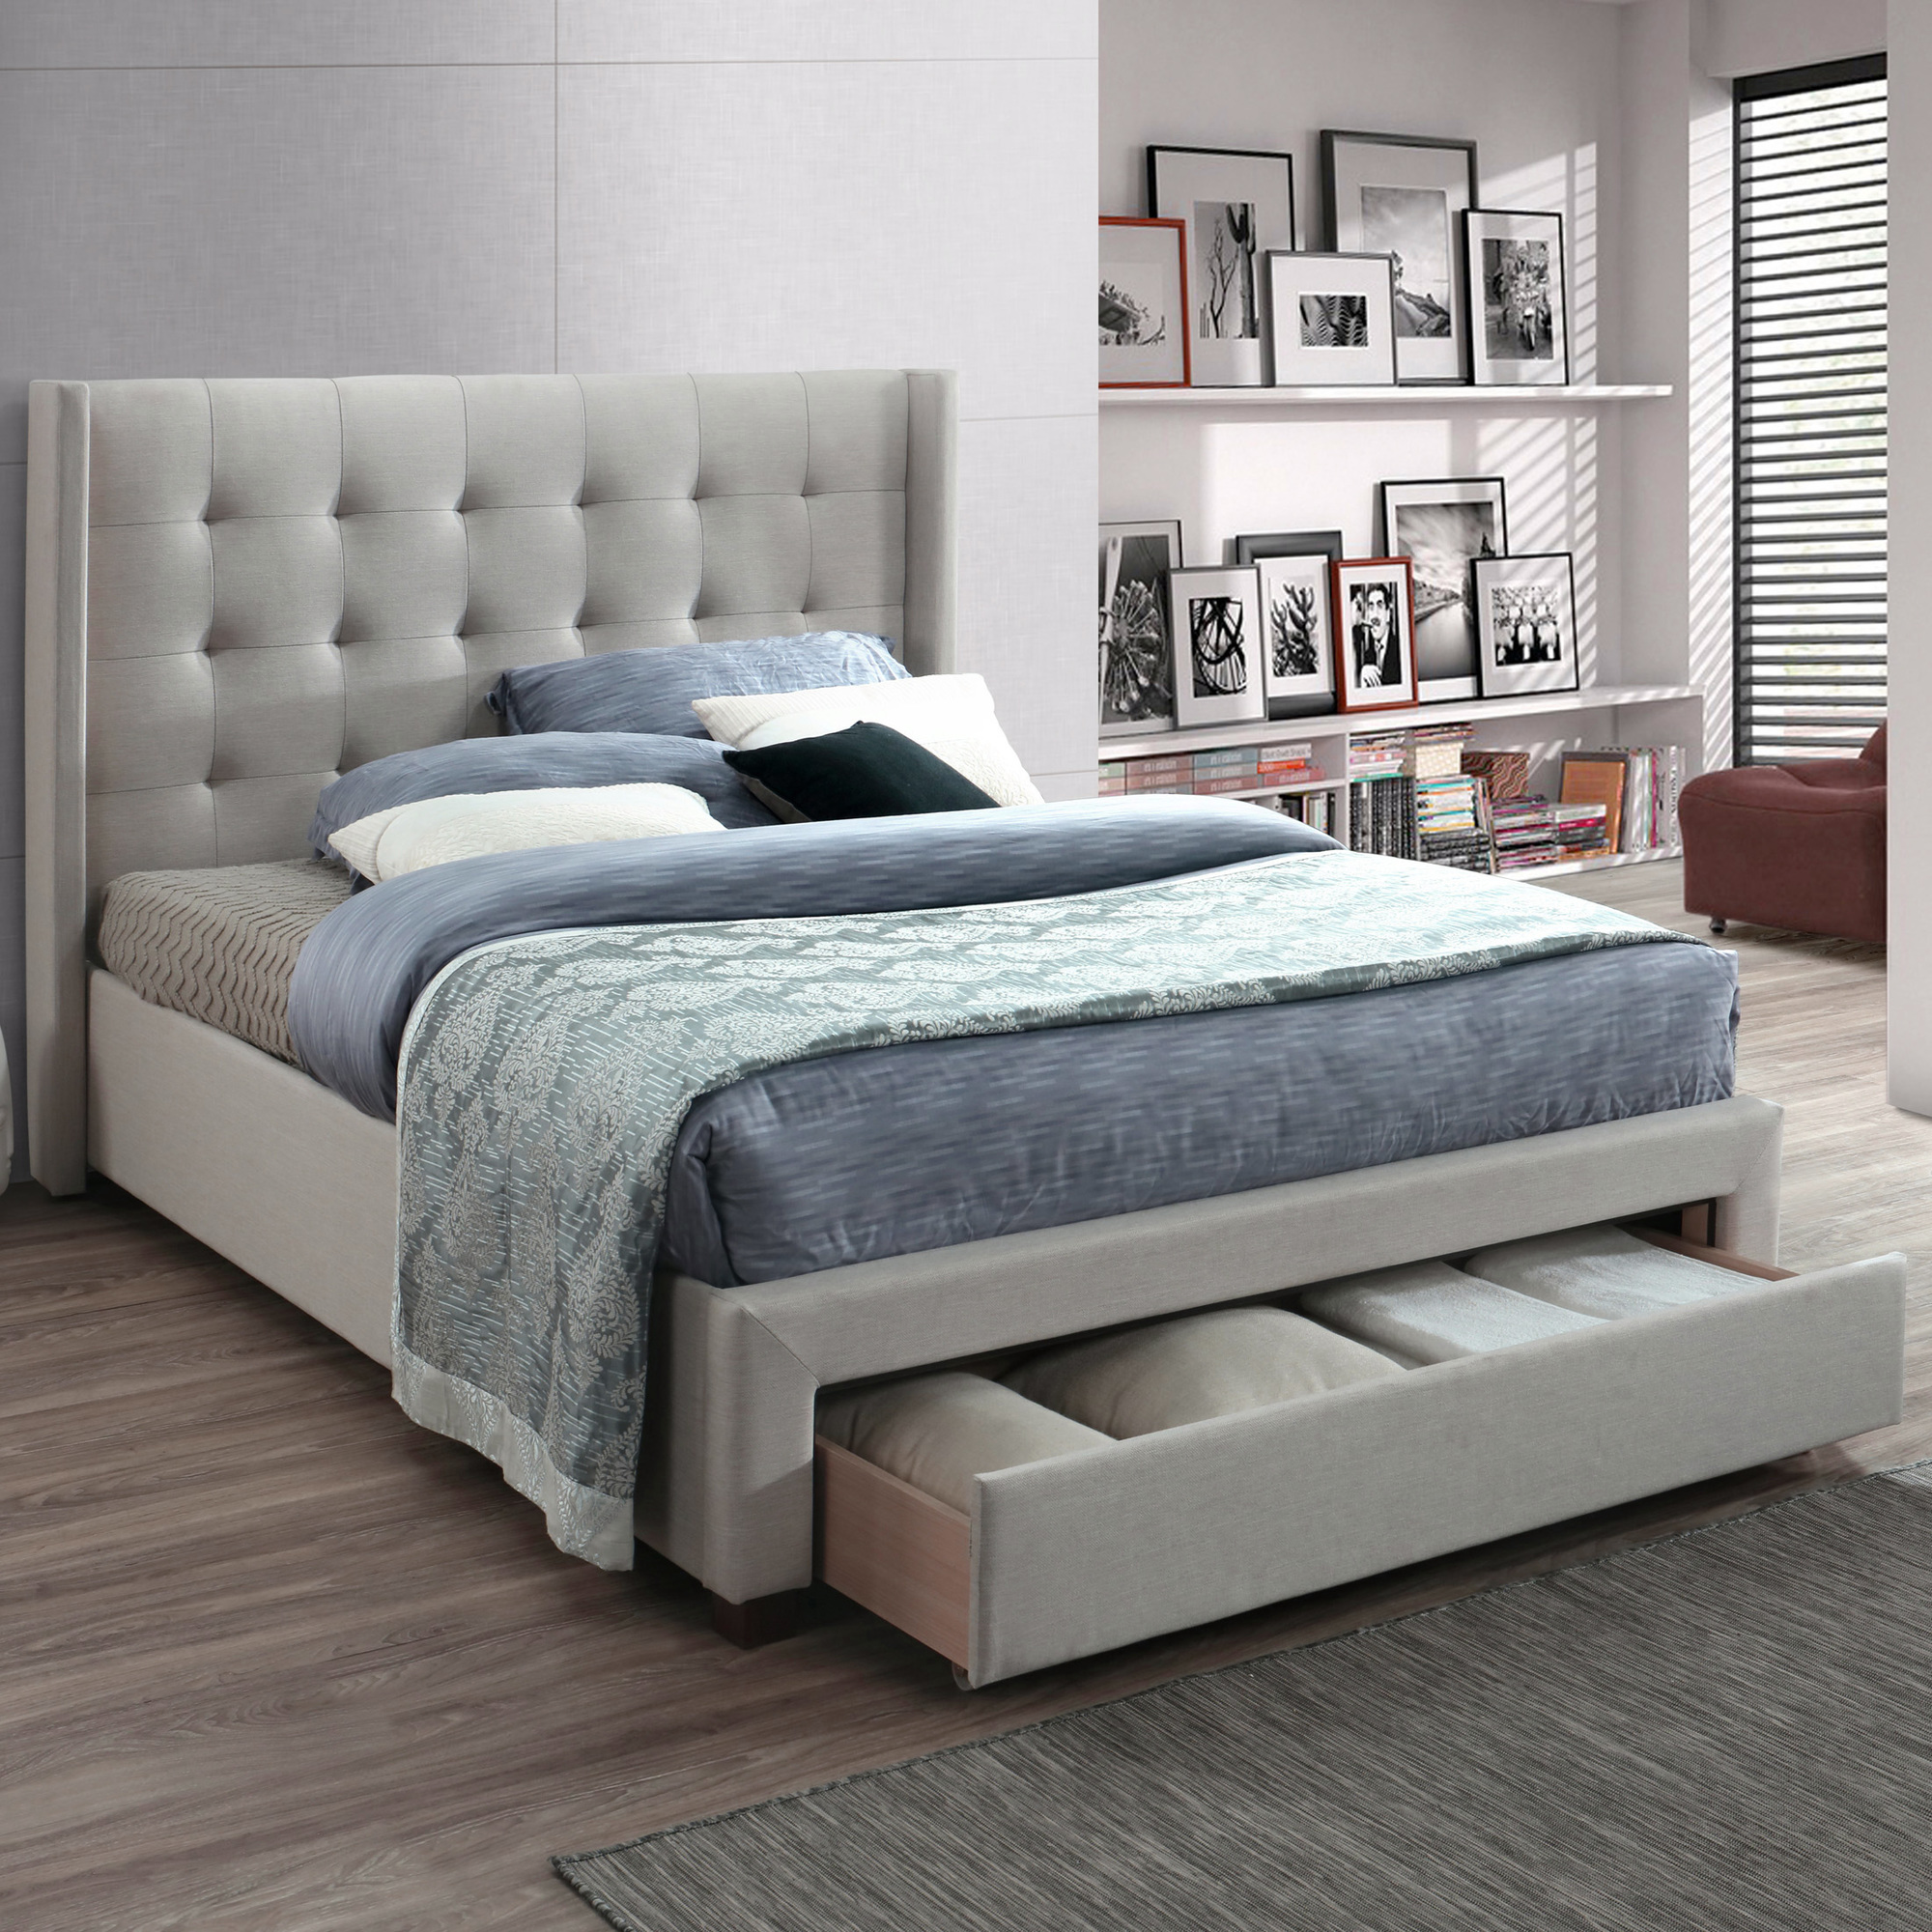 NEW Atlanta Queen Bed with Storage - VIC Furniture,Beds | eBay